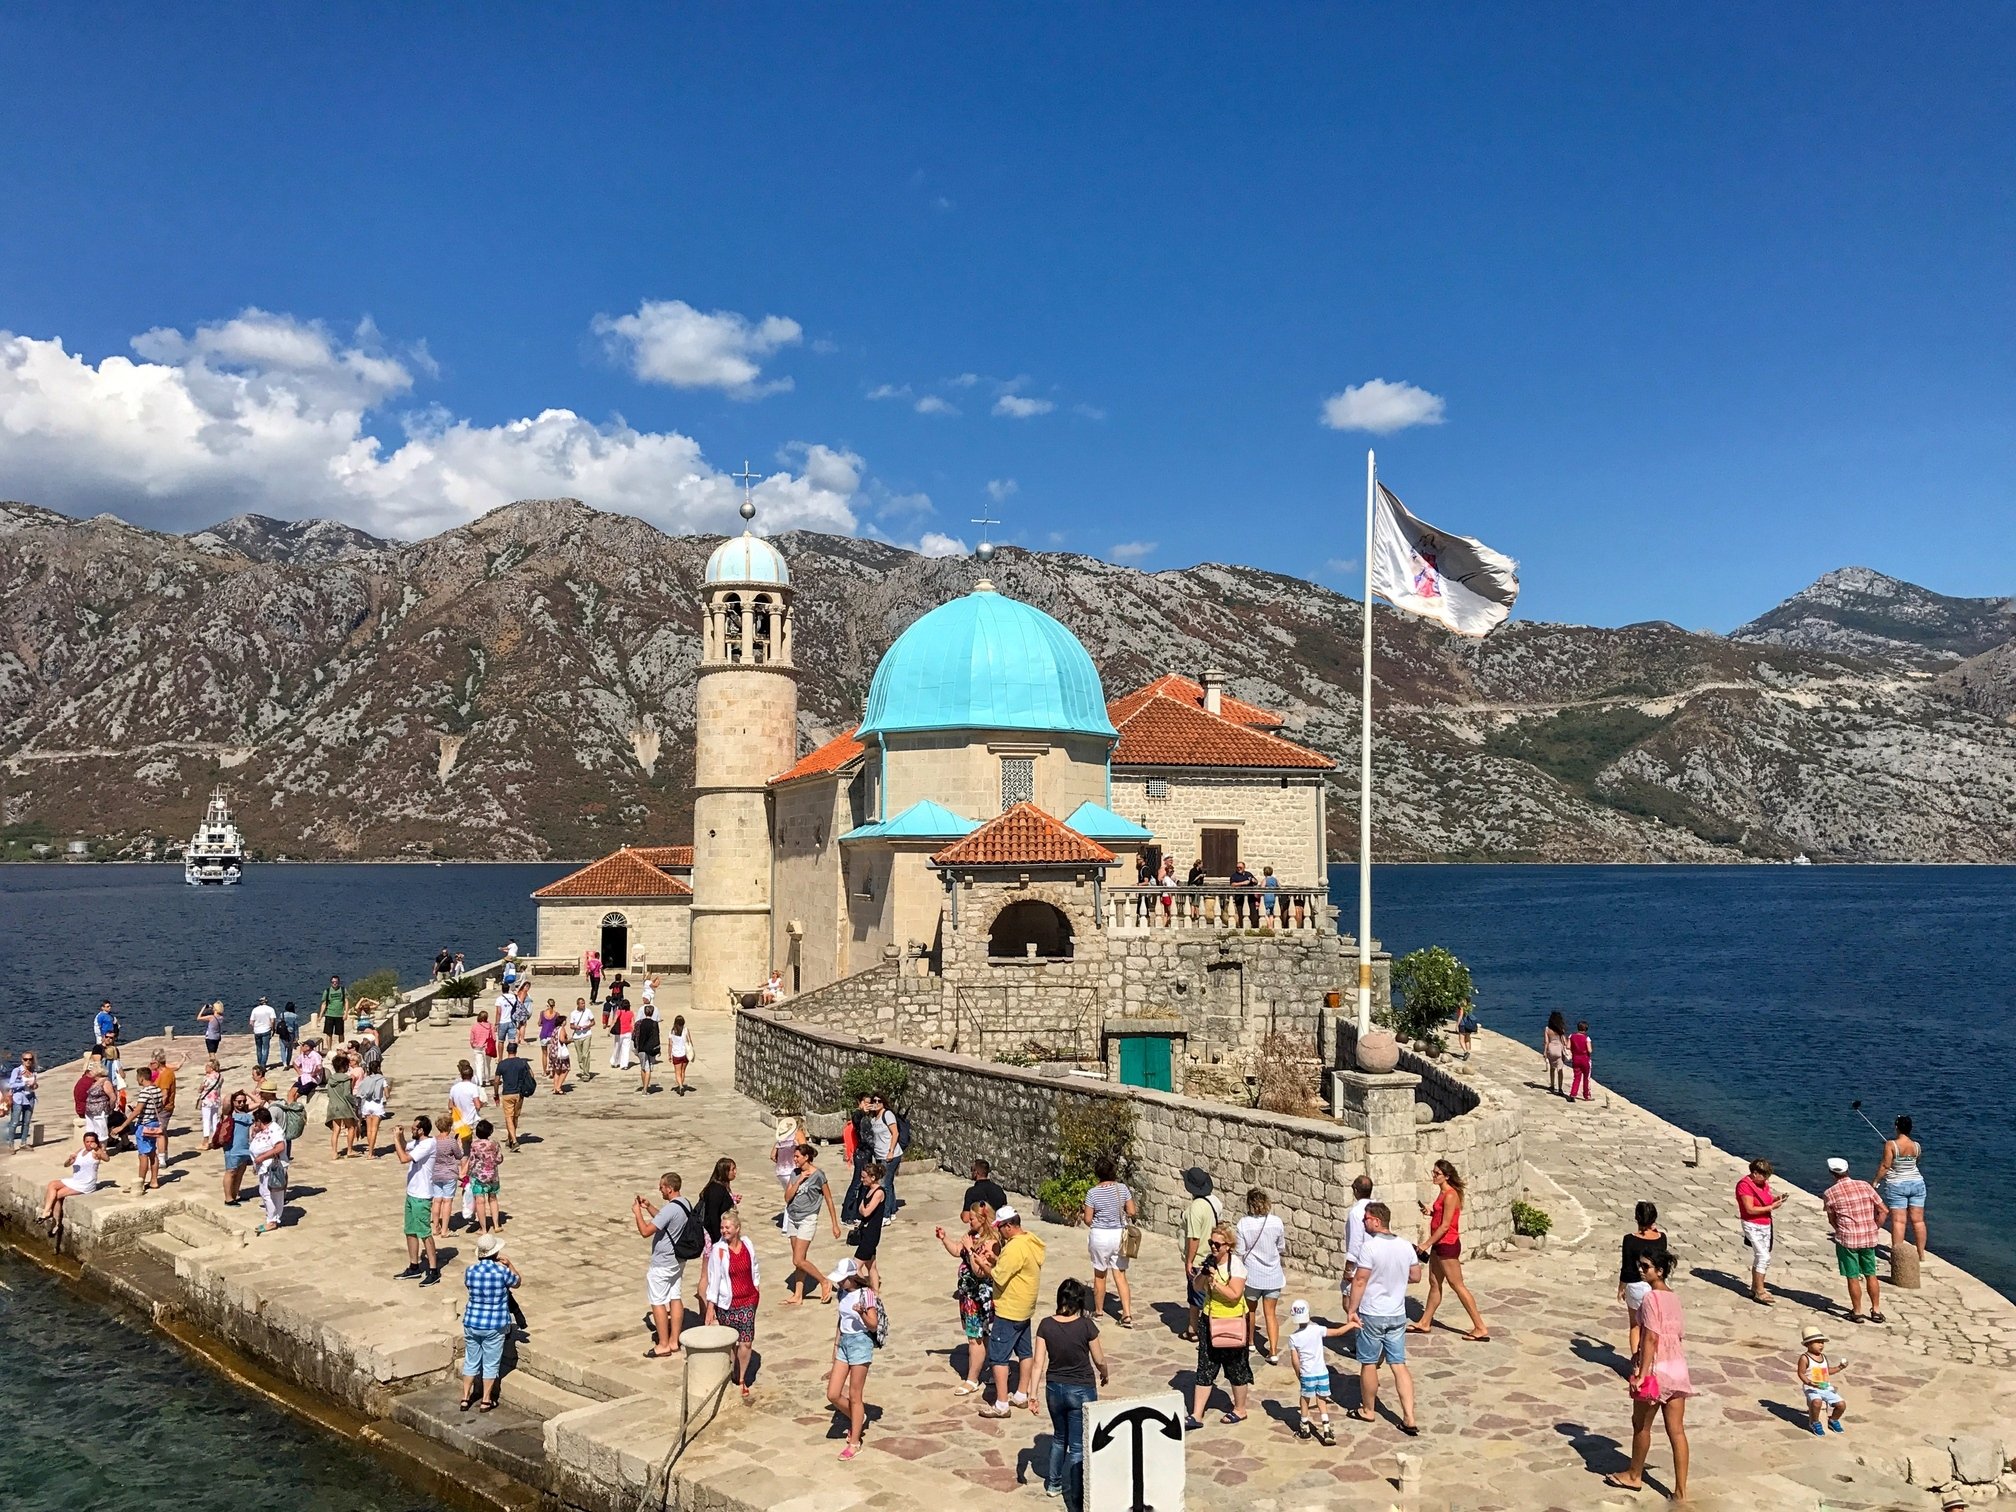 The Island of Our Lady of the Rock in the Bay of Kotor, Montenegro.  (Photo by Özge Şengelen)